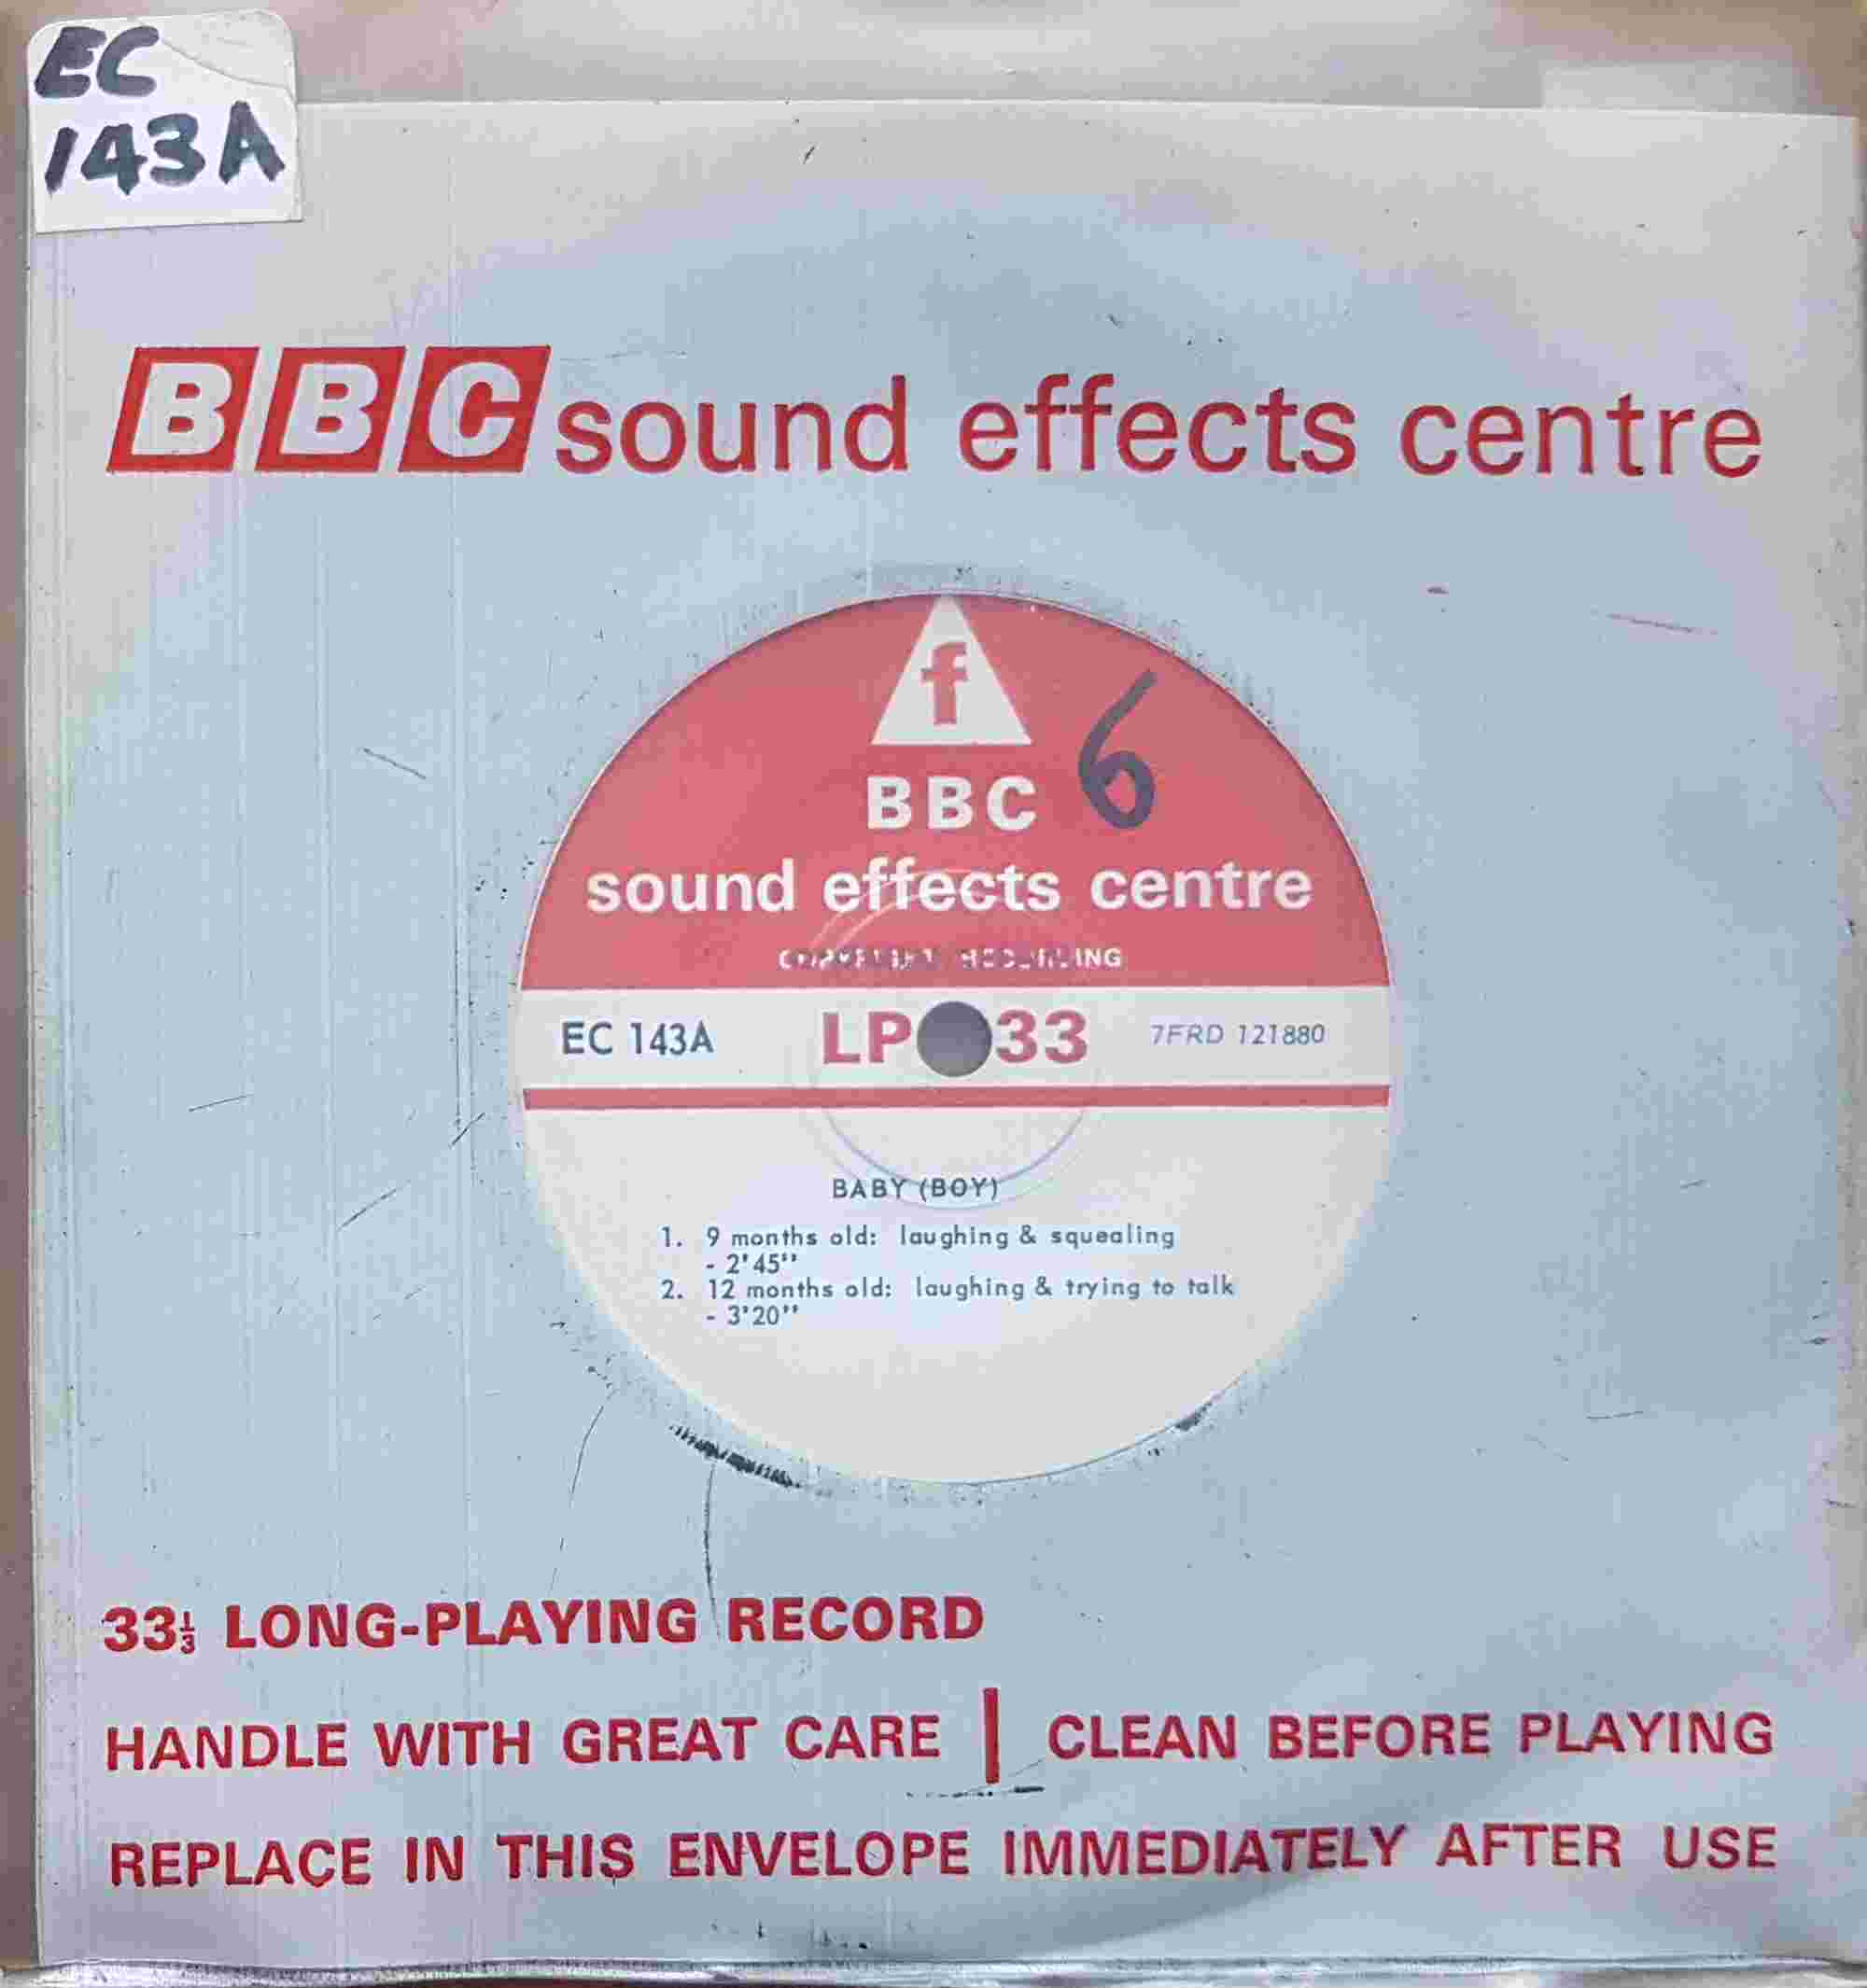 Picture of EC 143A Baby (Boy) by artist Not registered from the BBC singles - Records and Tapes library